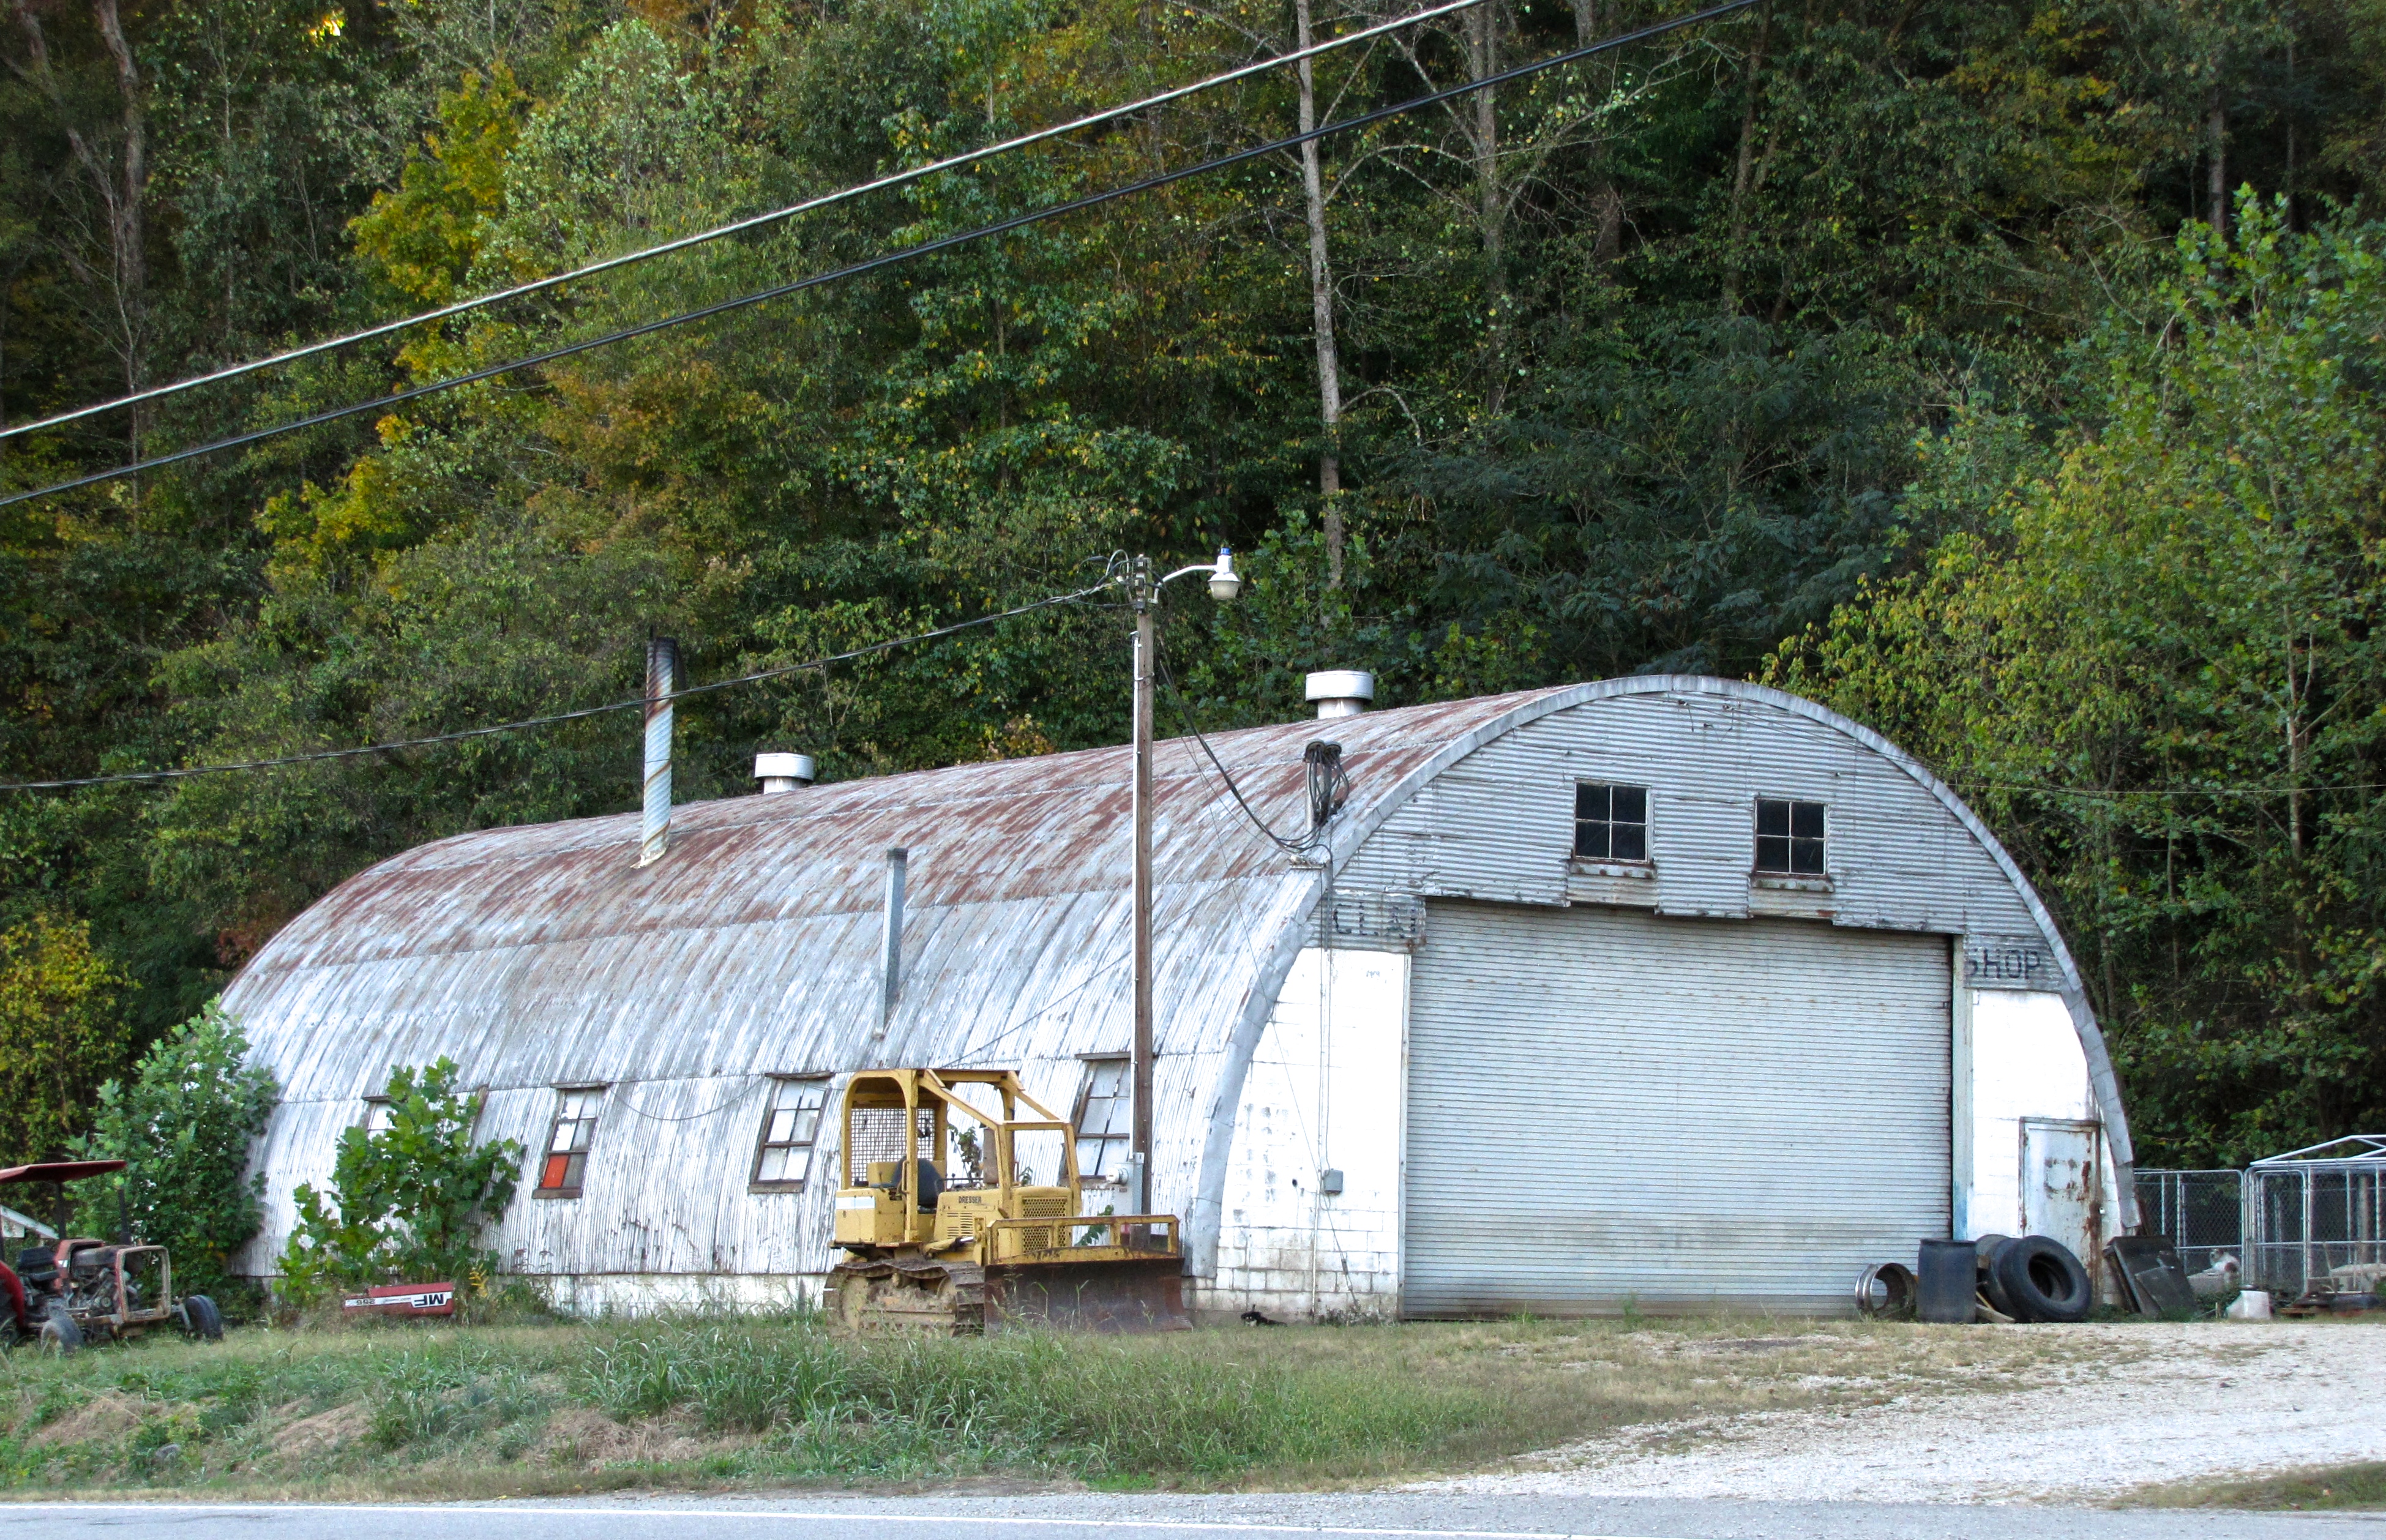 quonset hut in Tampa, FL